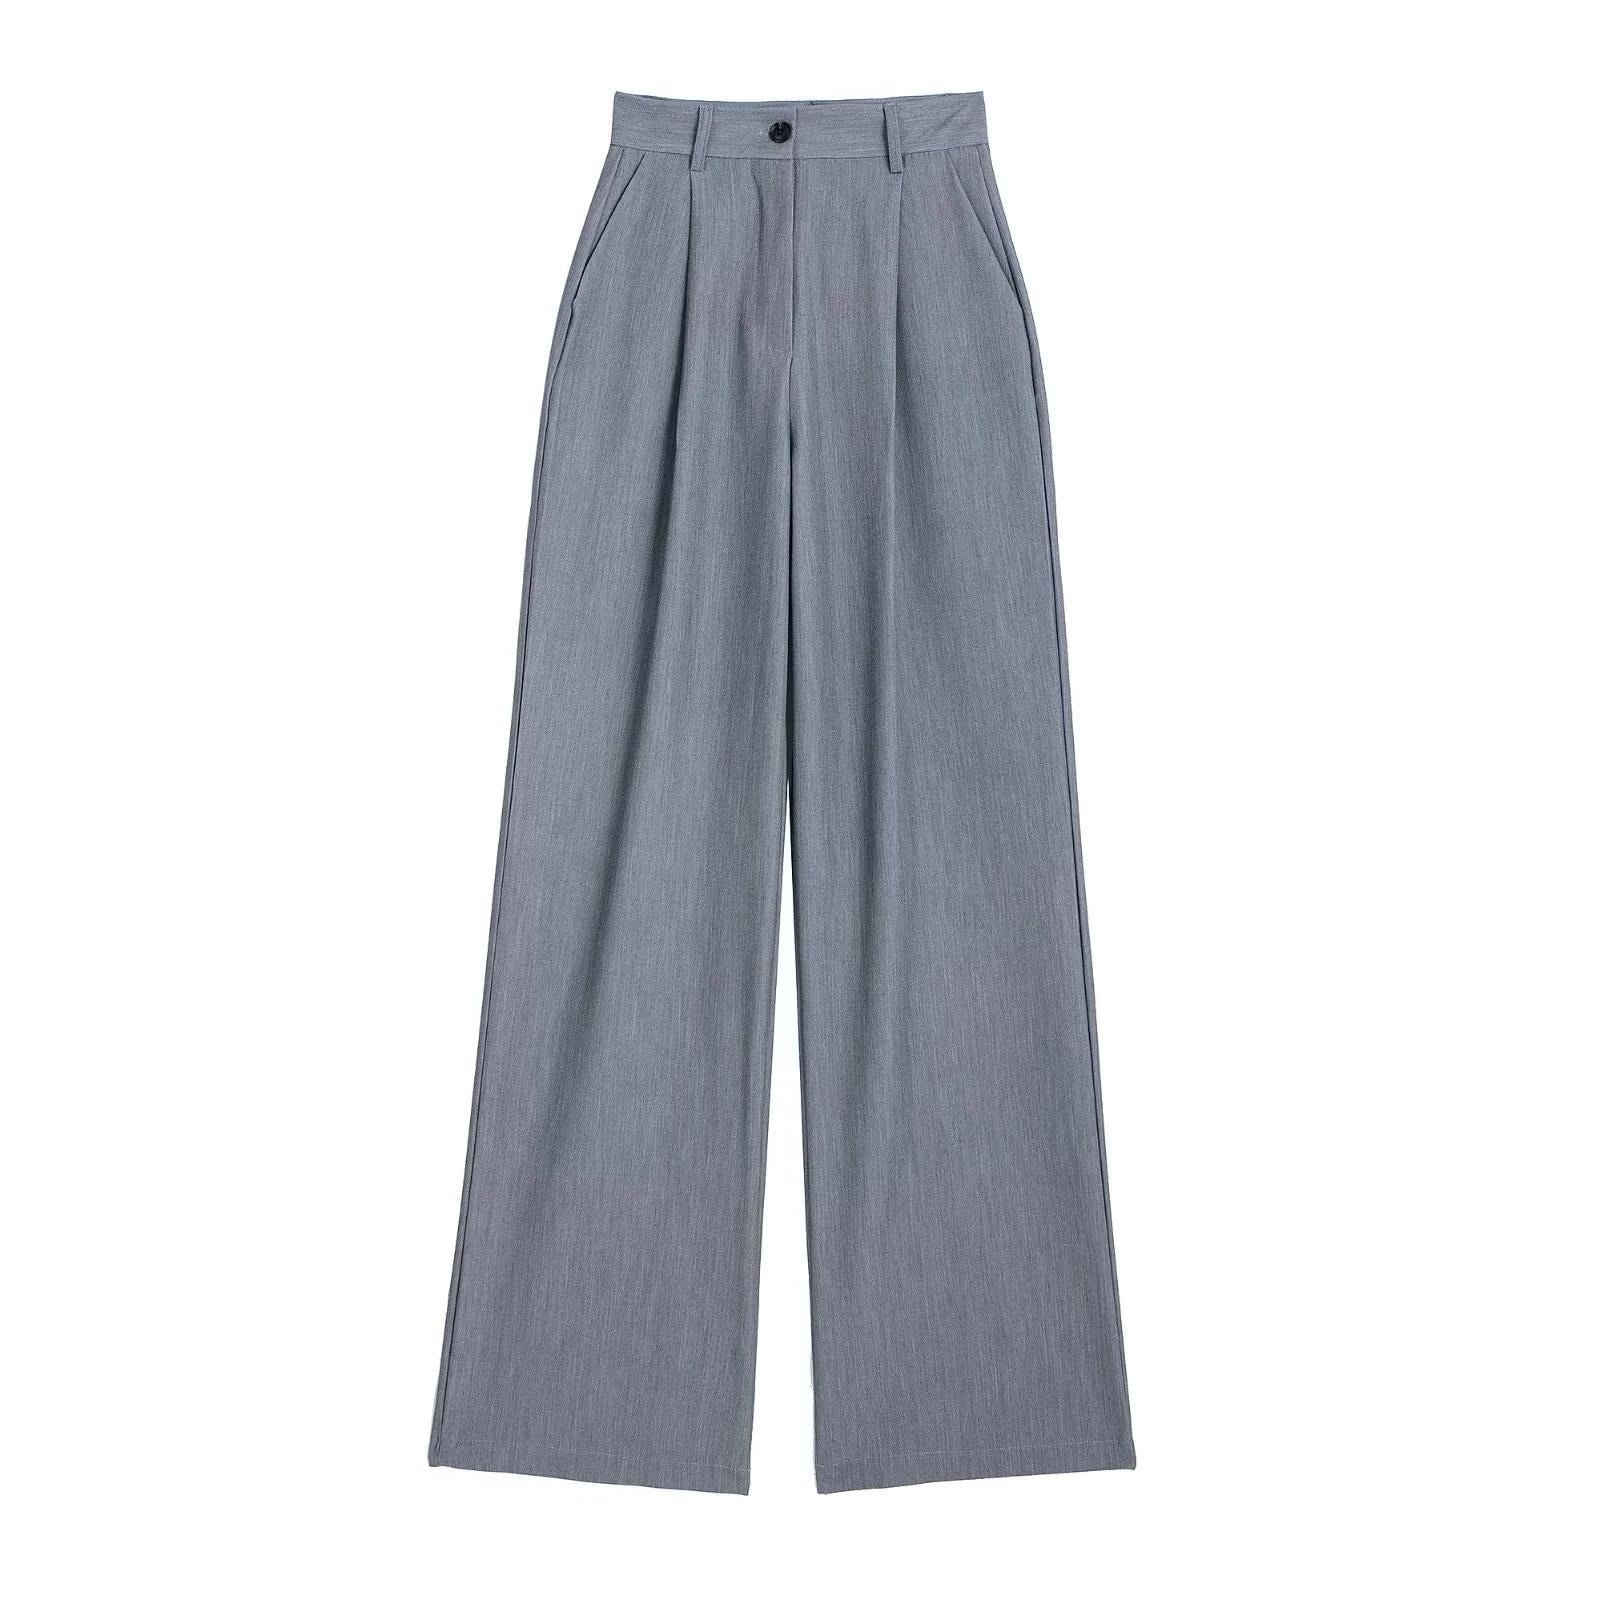 Retro Front Pleated High Waist Pants Casual Pants